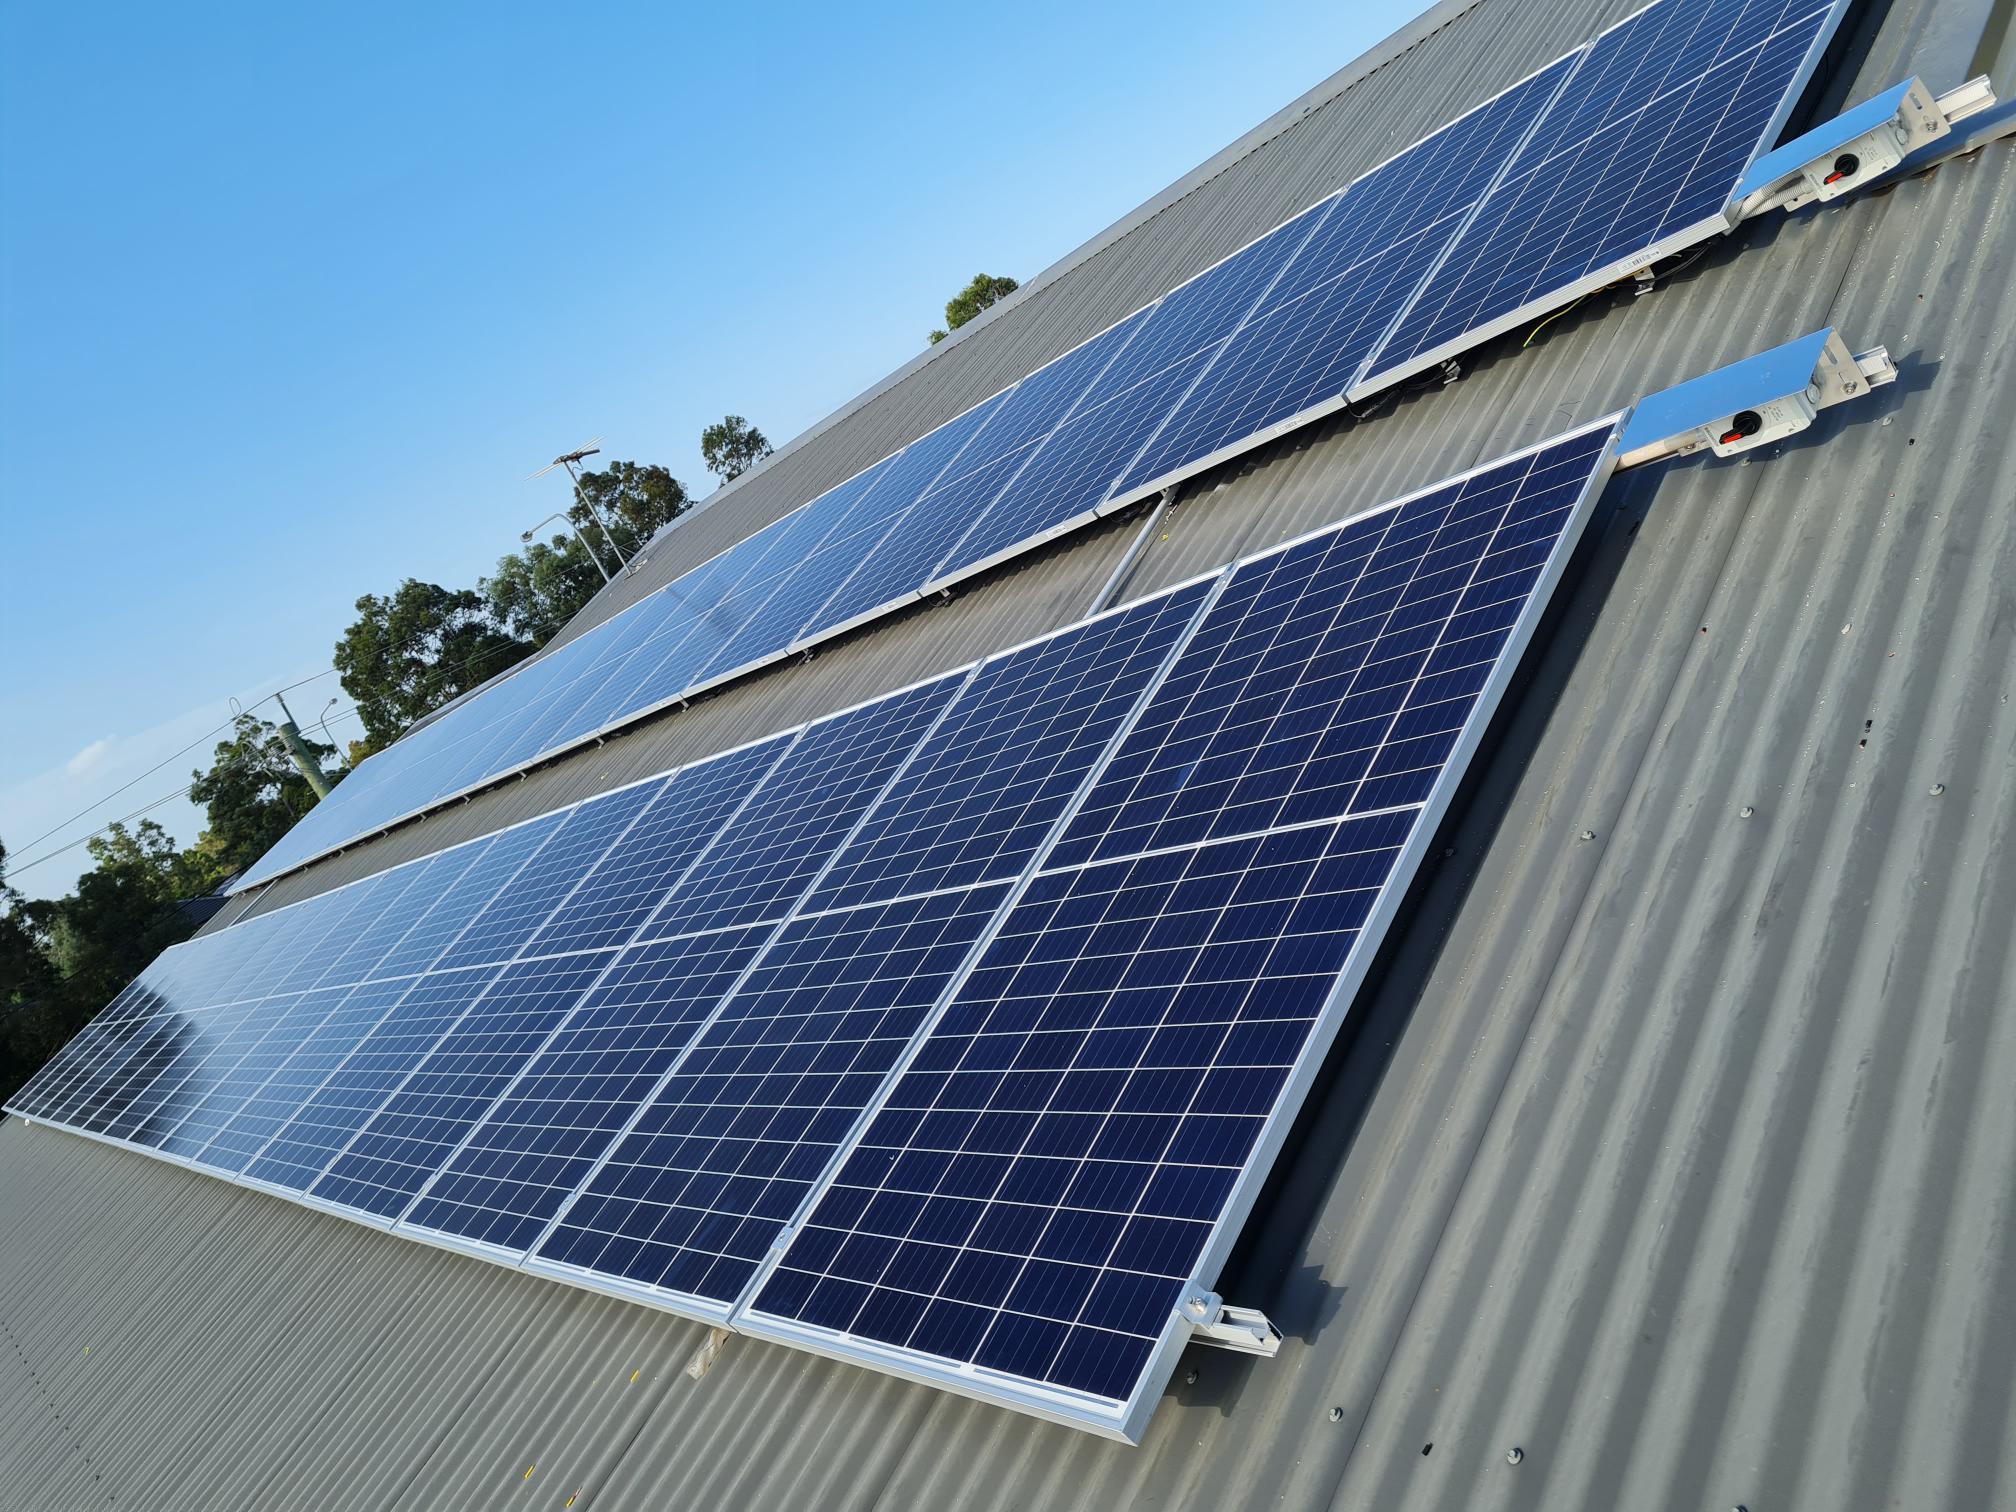 The Best Solar Product Available in Sydney: Why Yello Energy Group is the Premier Choice